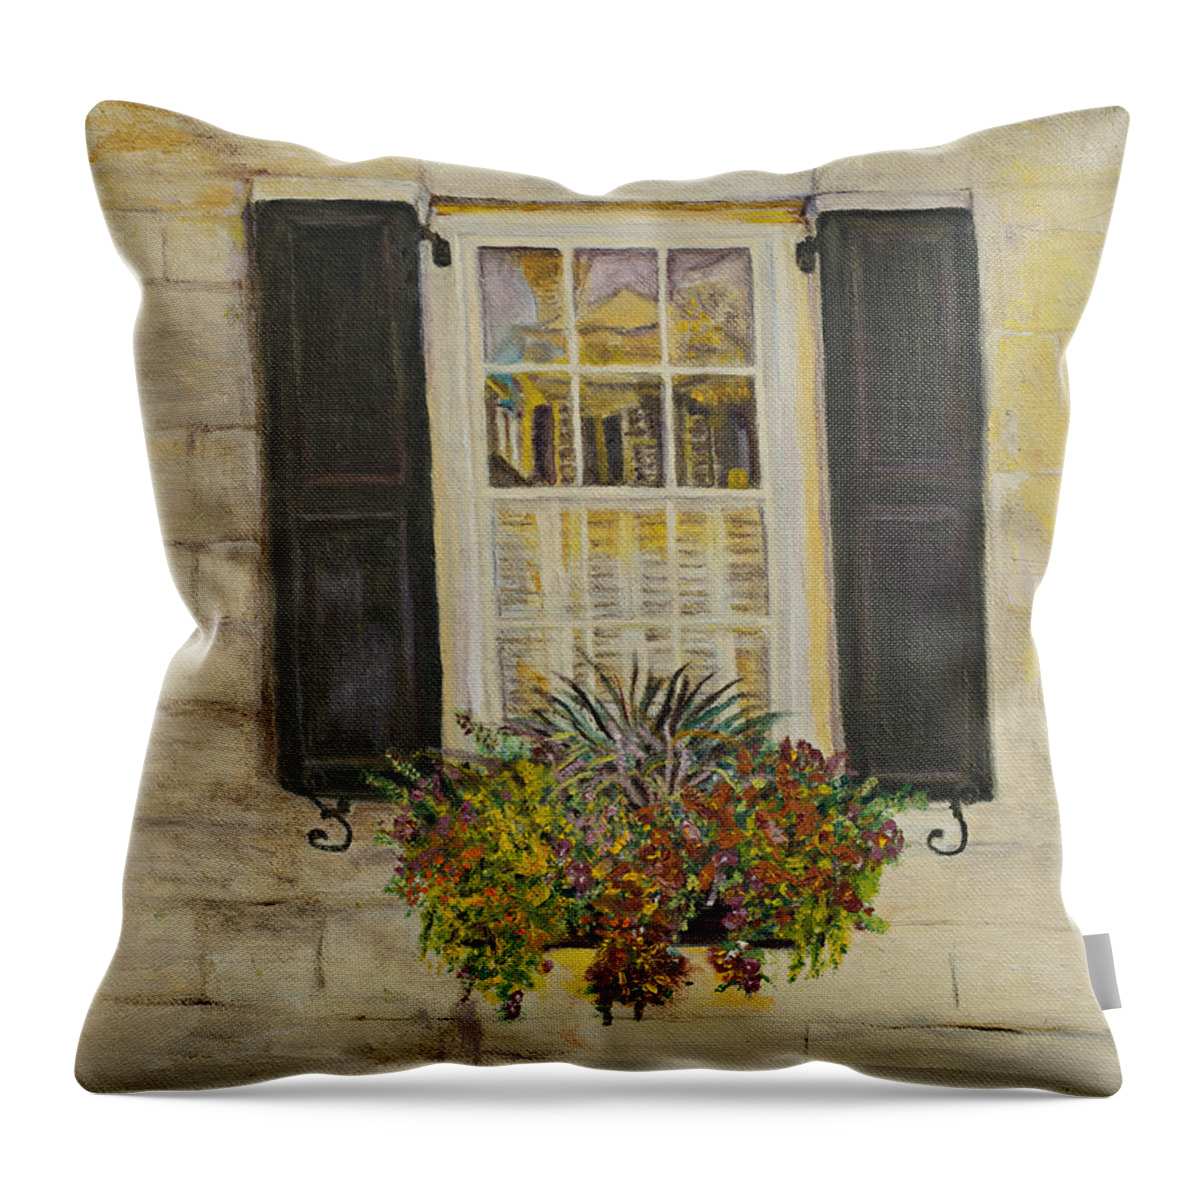 Flowers Throw Pillow featuring the painting Charleston Window by Kathy Knopp